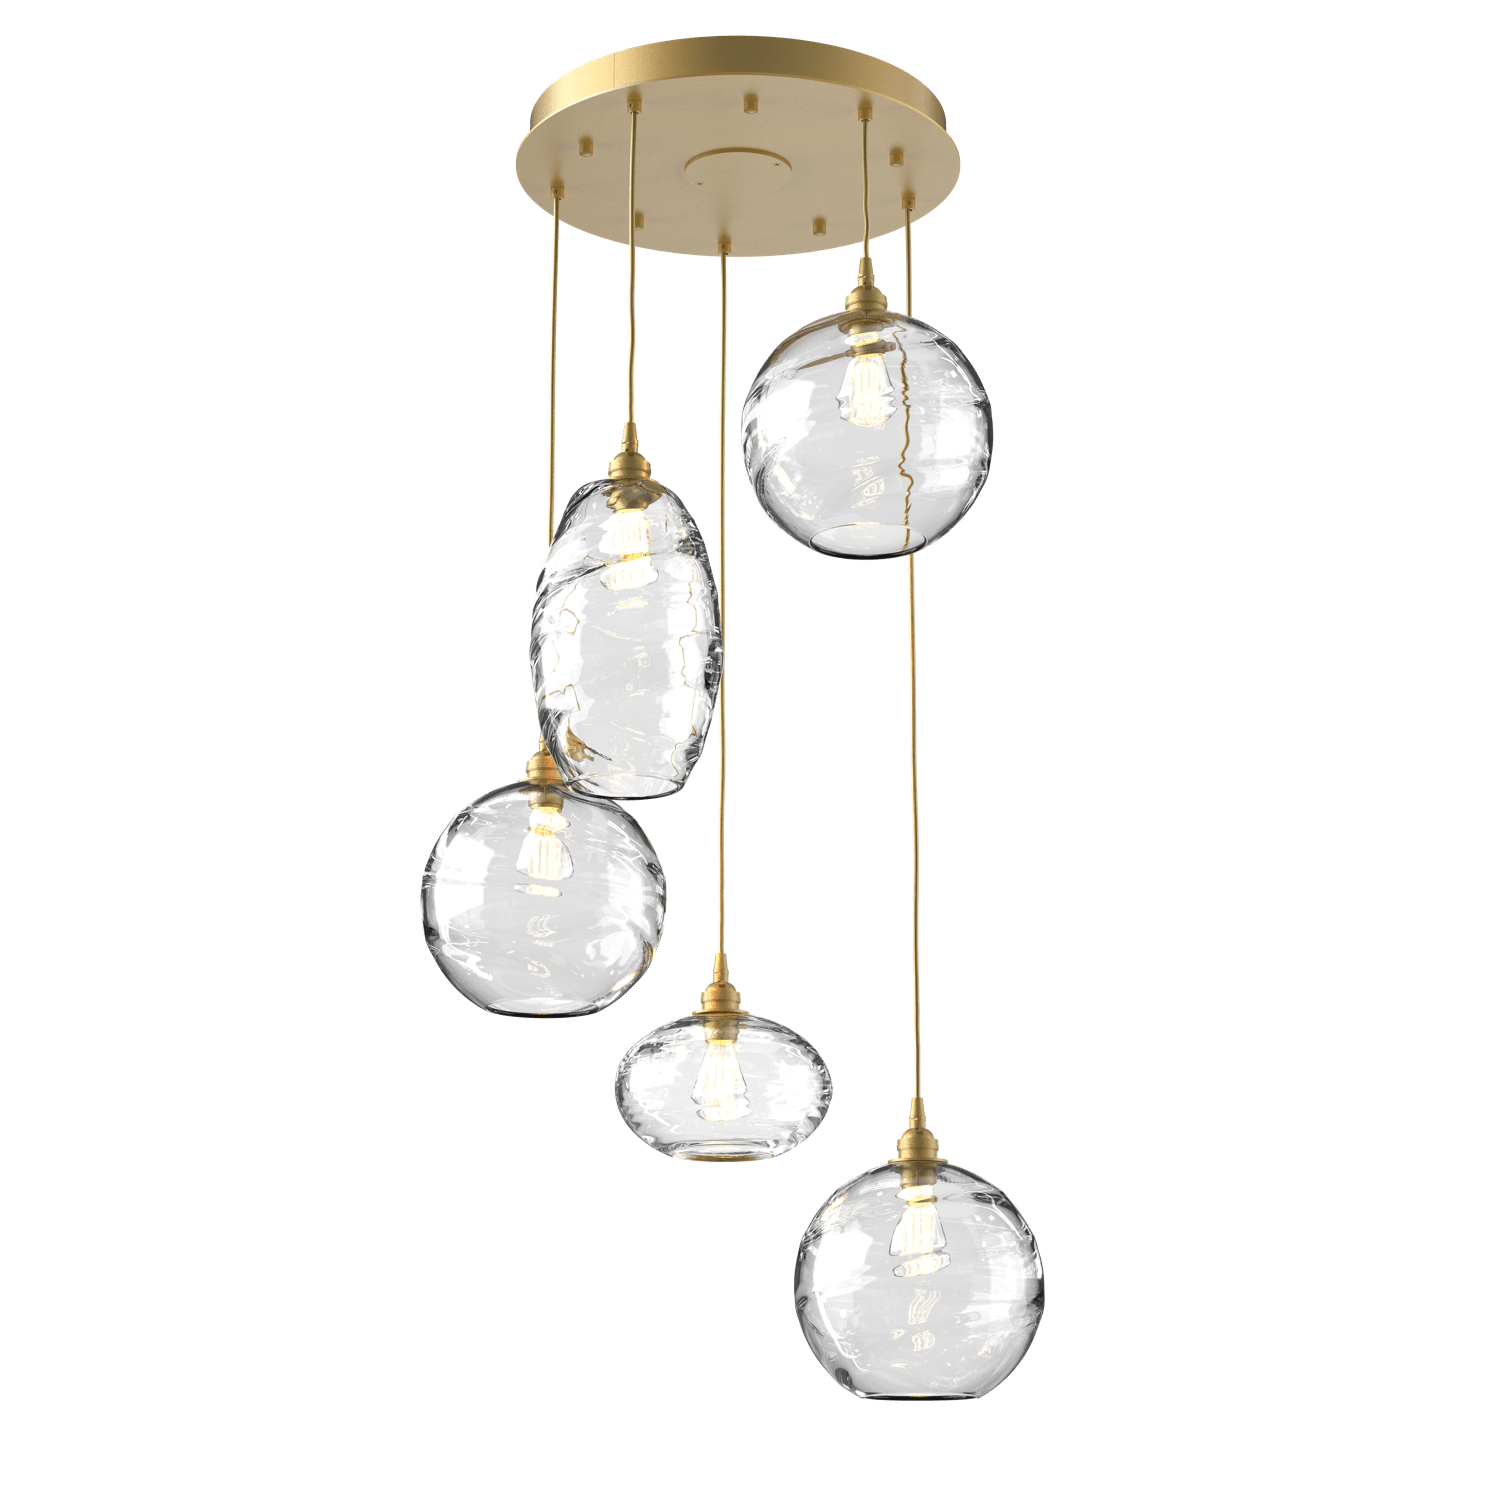 CHB0048-05-GB-OC-Hammerton-Studio-Optic-Blown-Glass-Misto-5-light-round-pendant-chandelier-with-gilded-brass-finish-and-optic-clear-blown-glass-shades-and-incandescent-lamping